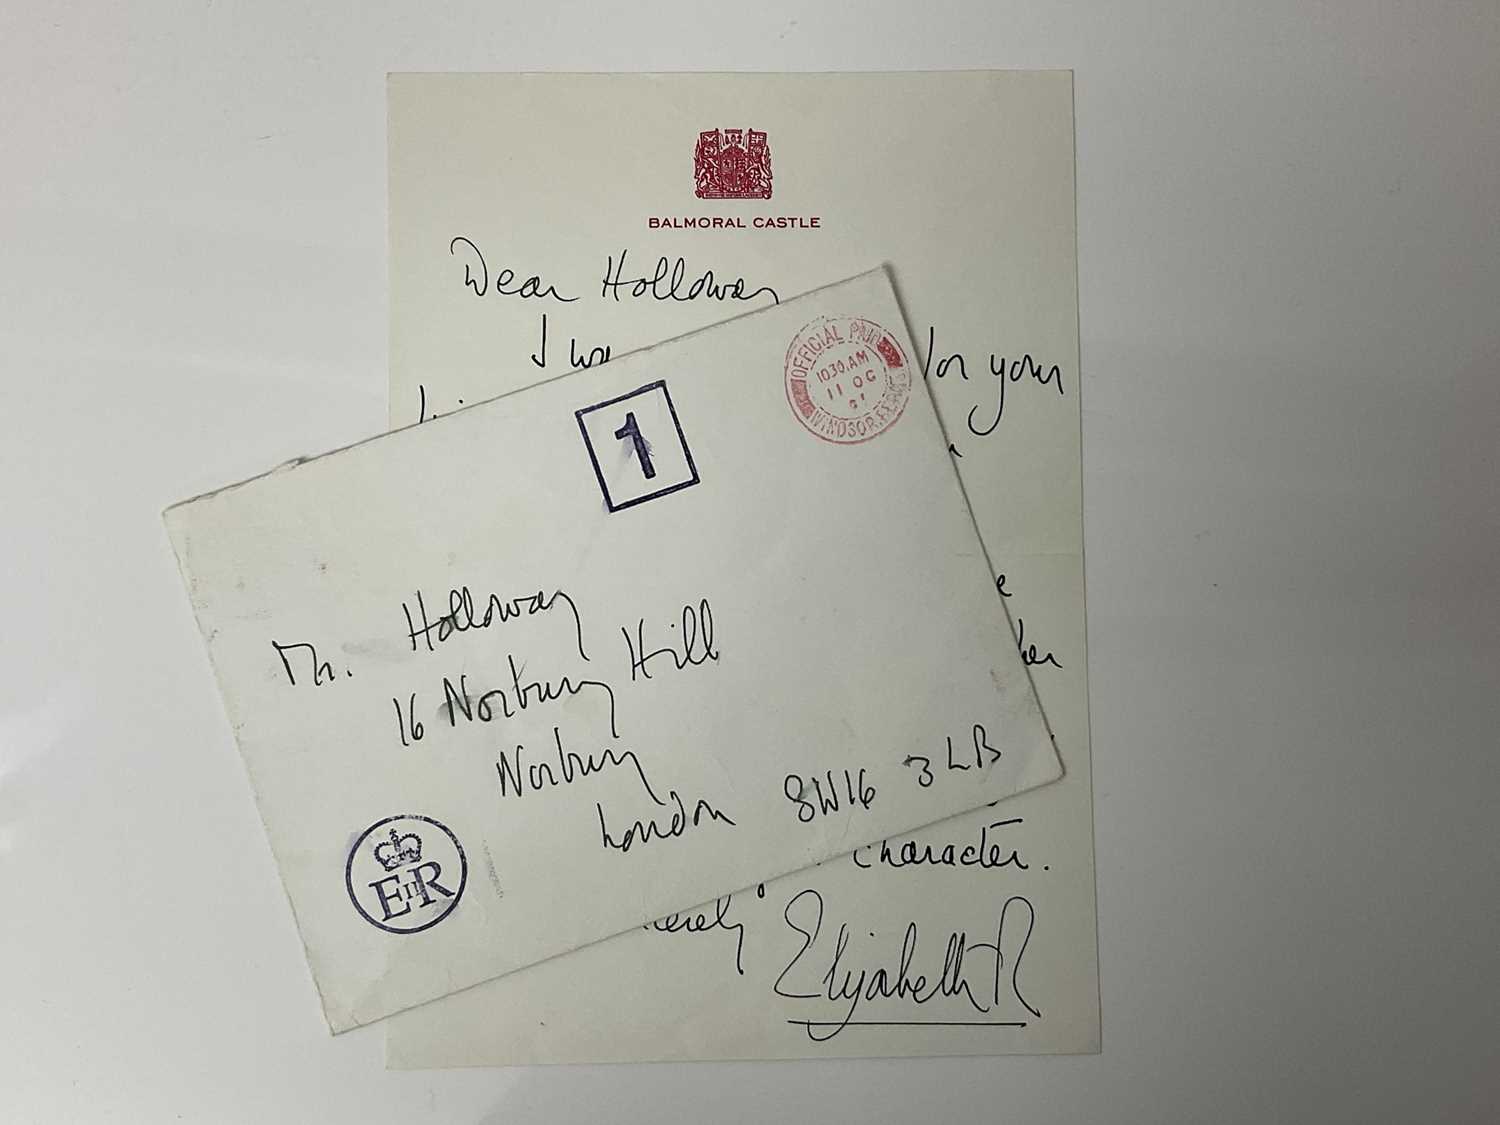 Lot 15 - H.M.Queen Elizabeth II, handwritten thank you letter to William Holloway - The Duke of Edinburgh's retired Page, written on Balmoral Castle headed notepaper thanking him for his letter of sympathy